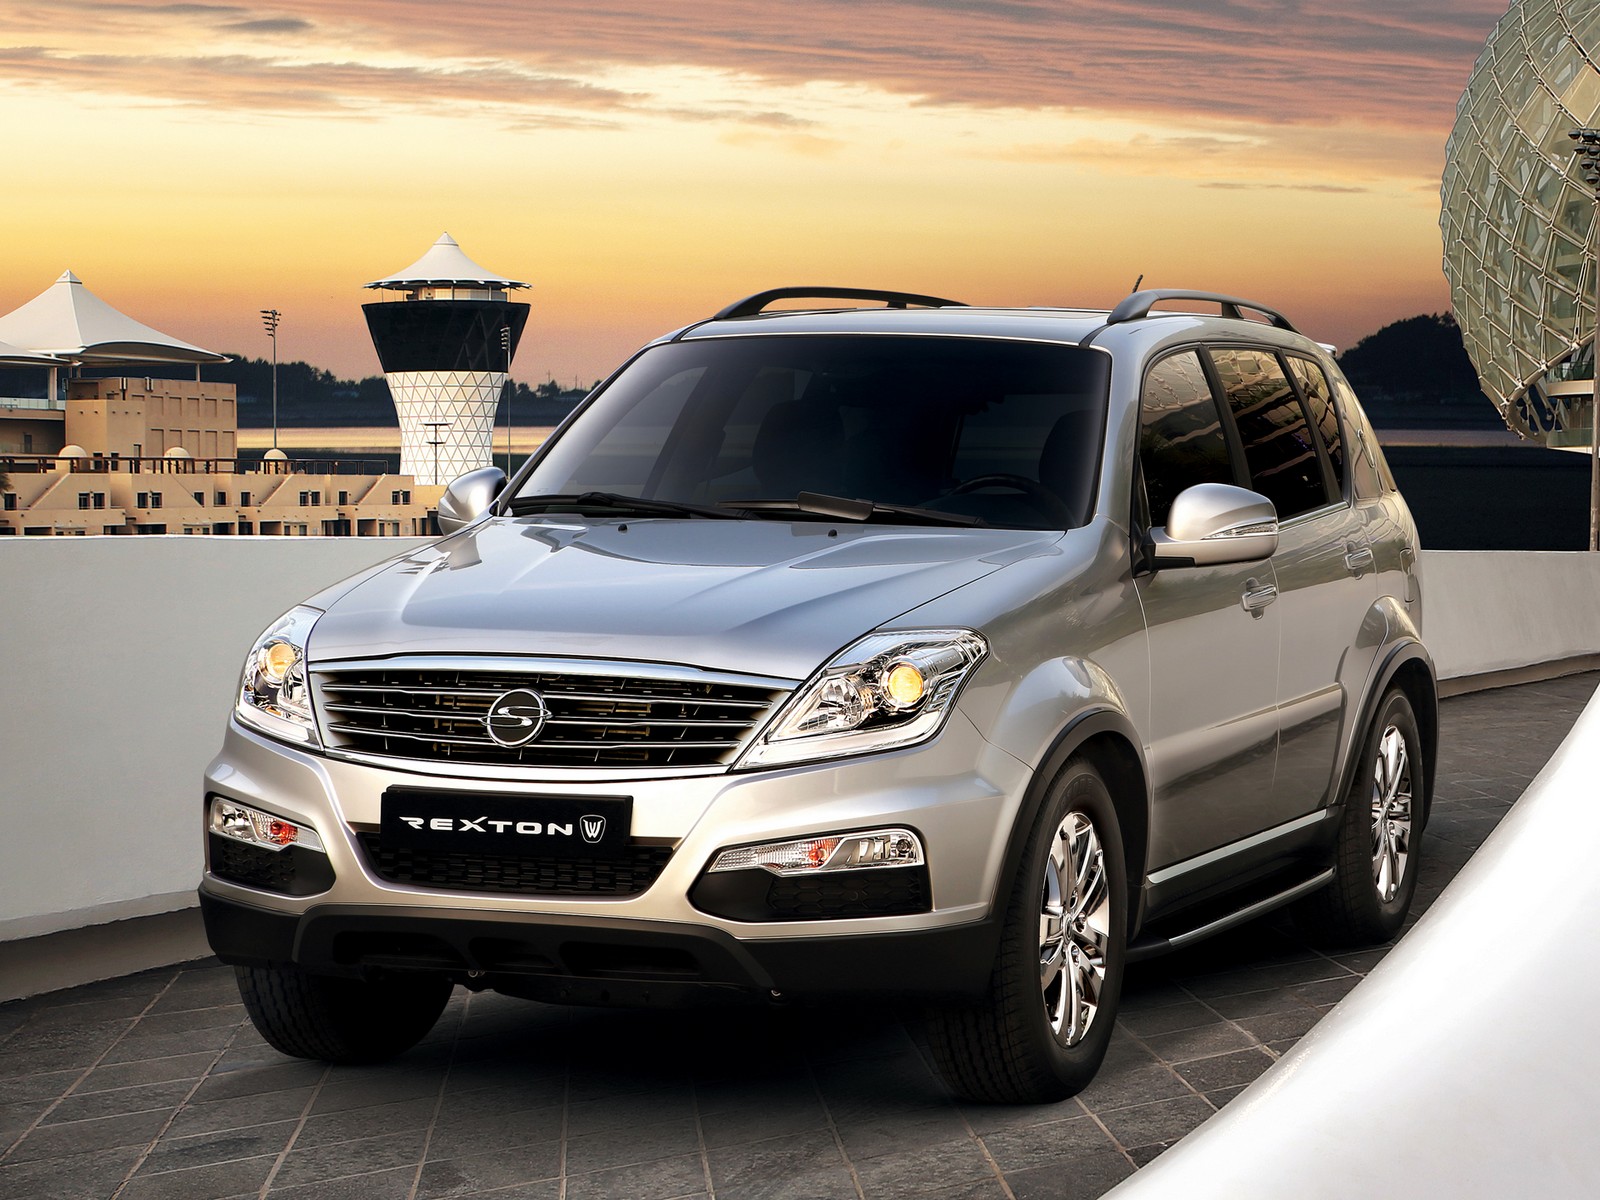 Ssangyong Wallpapers